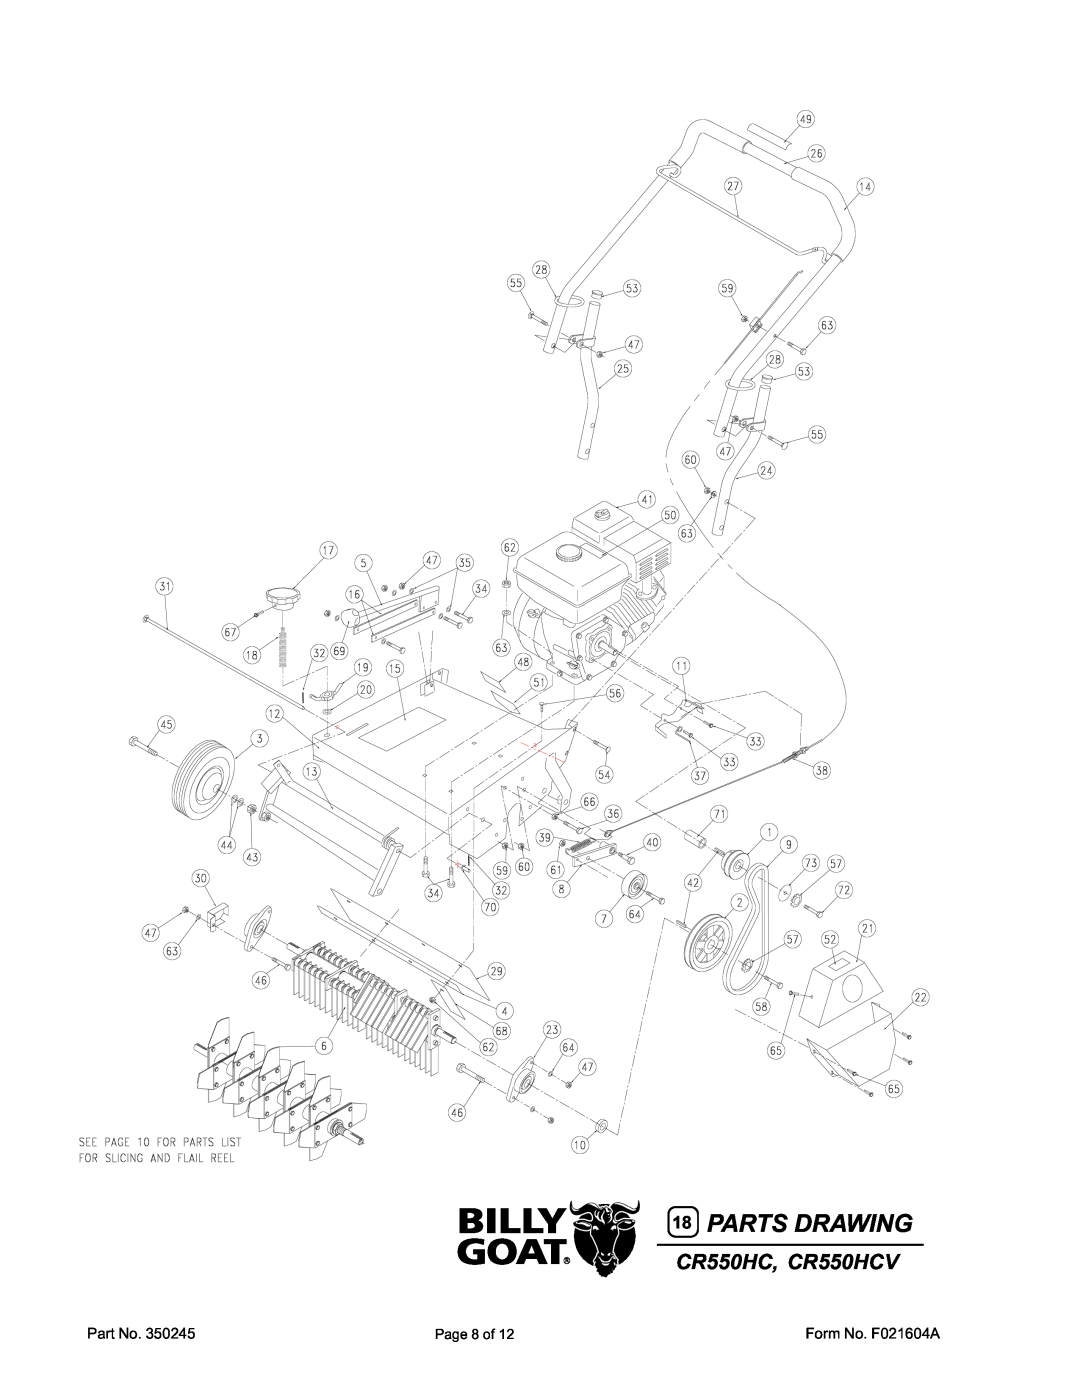 Billy Goat specifications 18PARTS DRAWING, CR550HC, CR550HCV 